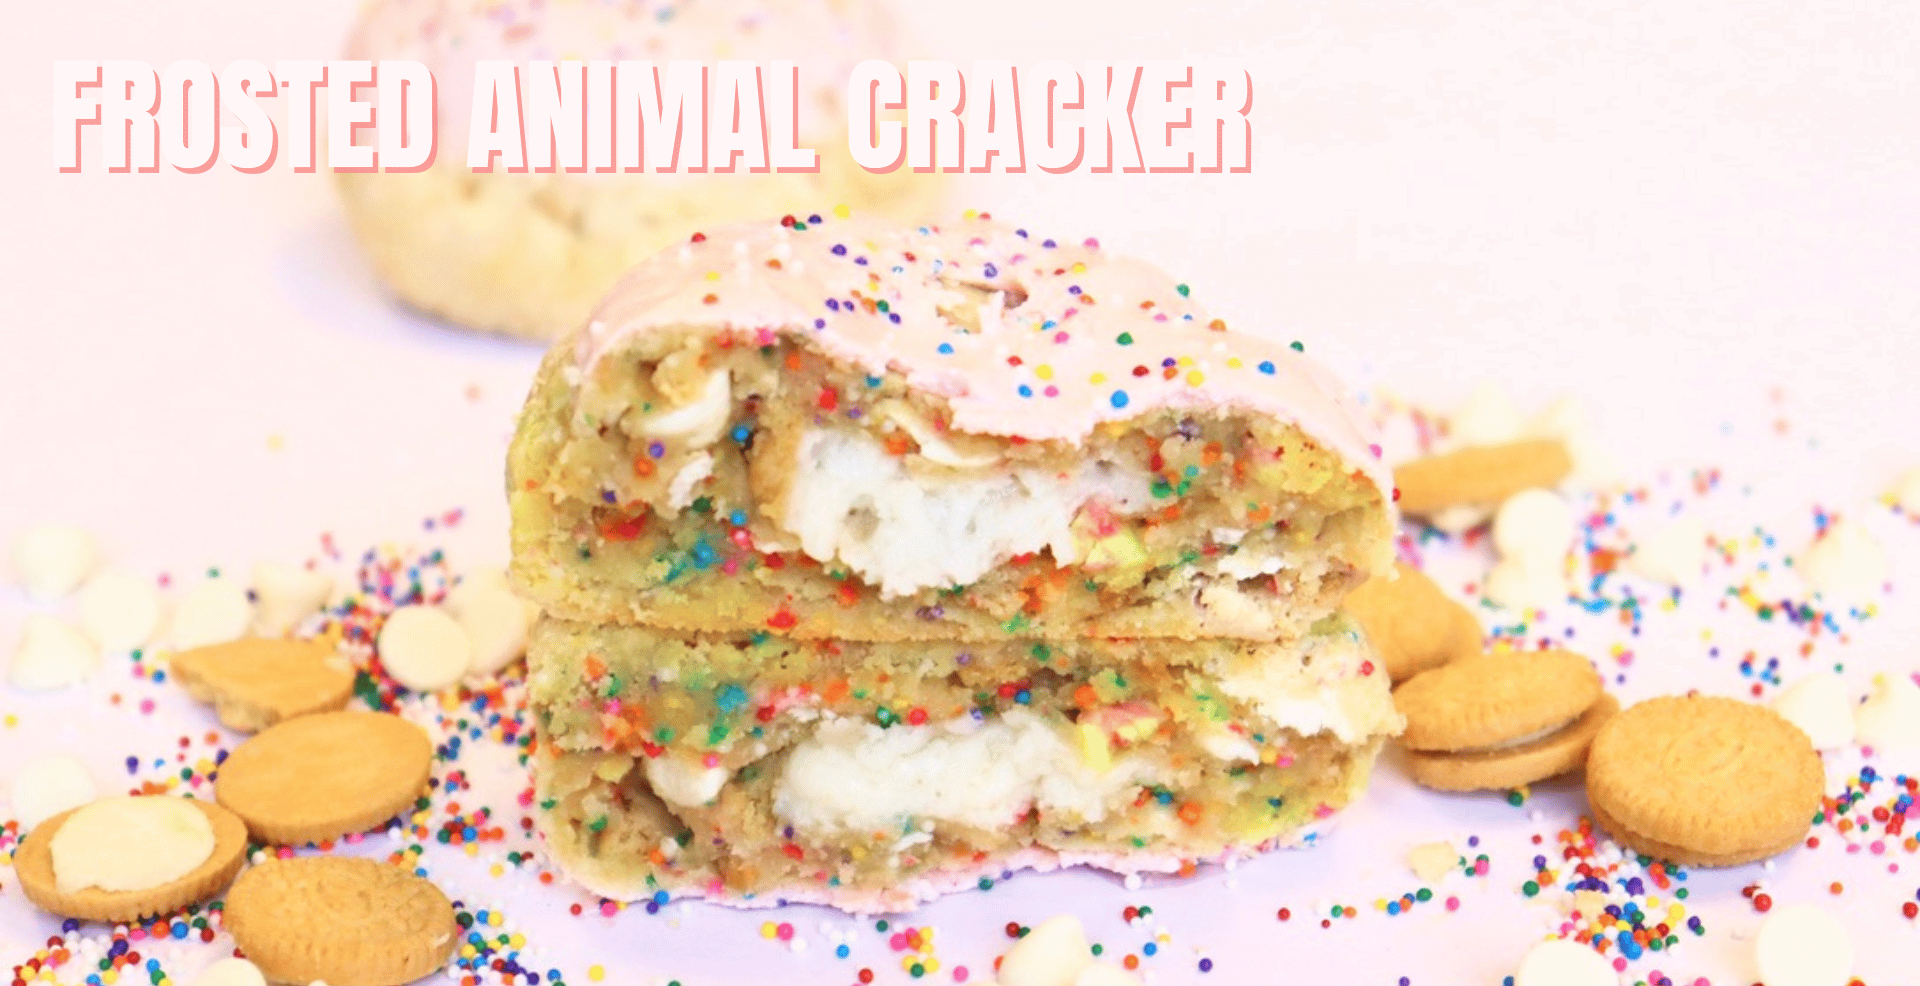 Frosted Animal cracker desktop.png__PID:40f33f90-4ee6-465d-9927-b6308a934b0f